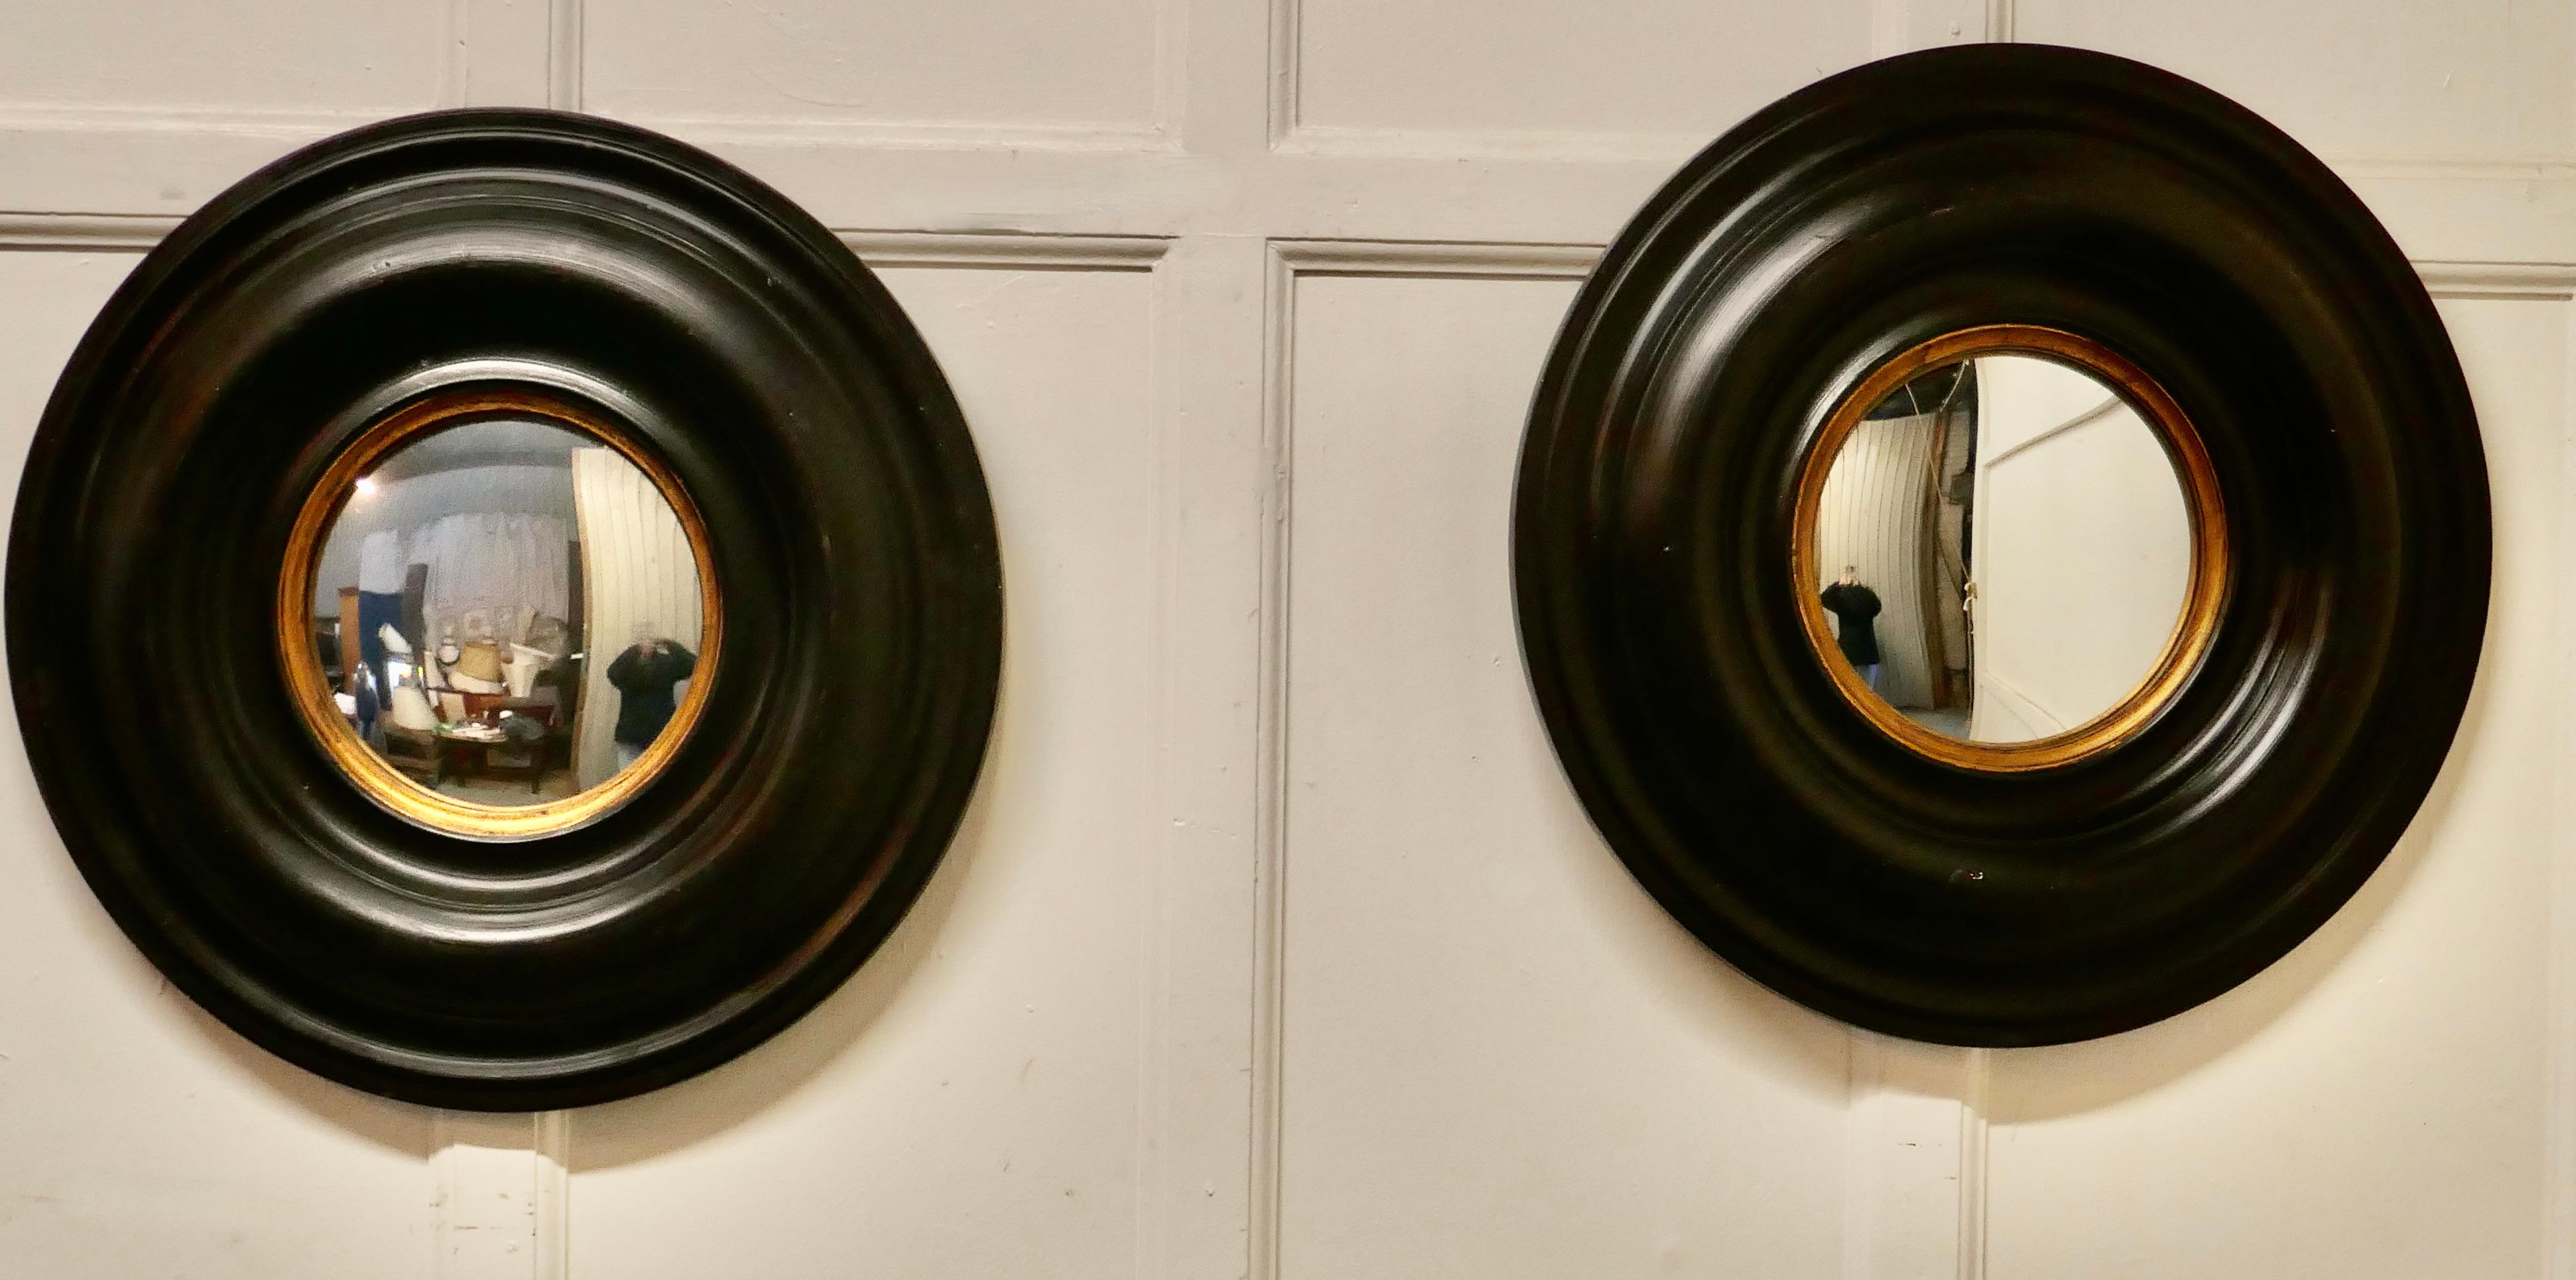 Pair of Regency style ebonised round convex mirrors 

A splendid pair of Large Regency Style Convex Mirrors, the 9” looking glasses are convex, they are set in 8” wide moulded ebonised frames
It is unusual to find a pair this size and they look